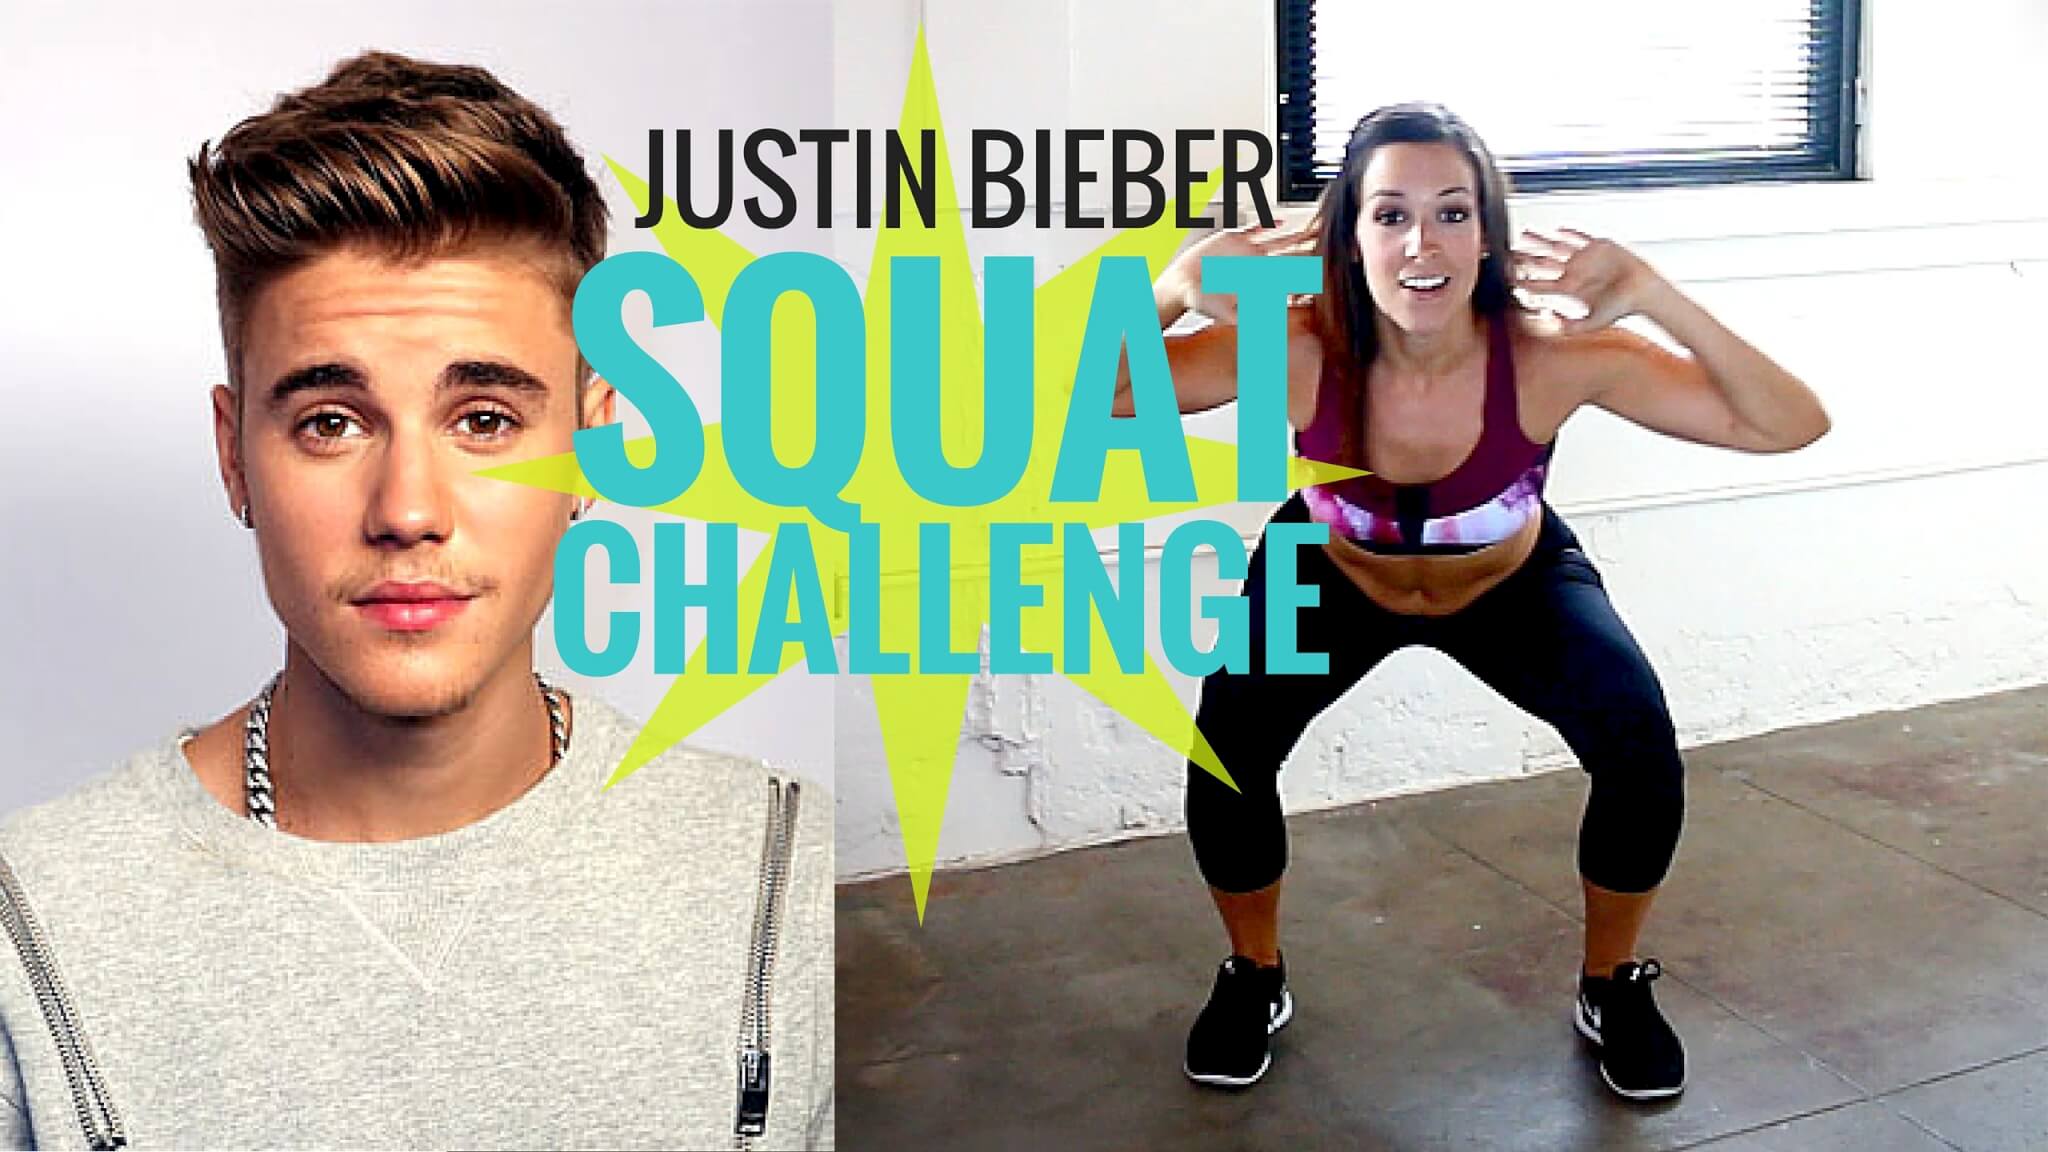 Justin Bieber What Do You Mean SQUAT CHALLENGE! - Super Sister Fitness2048 x 1152